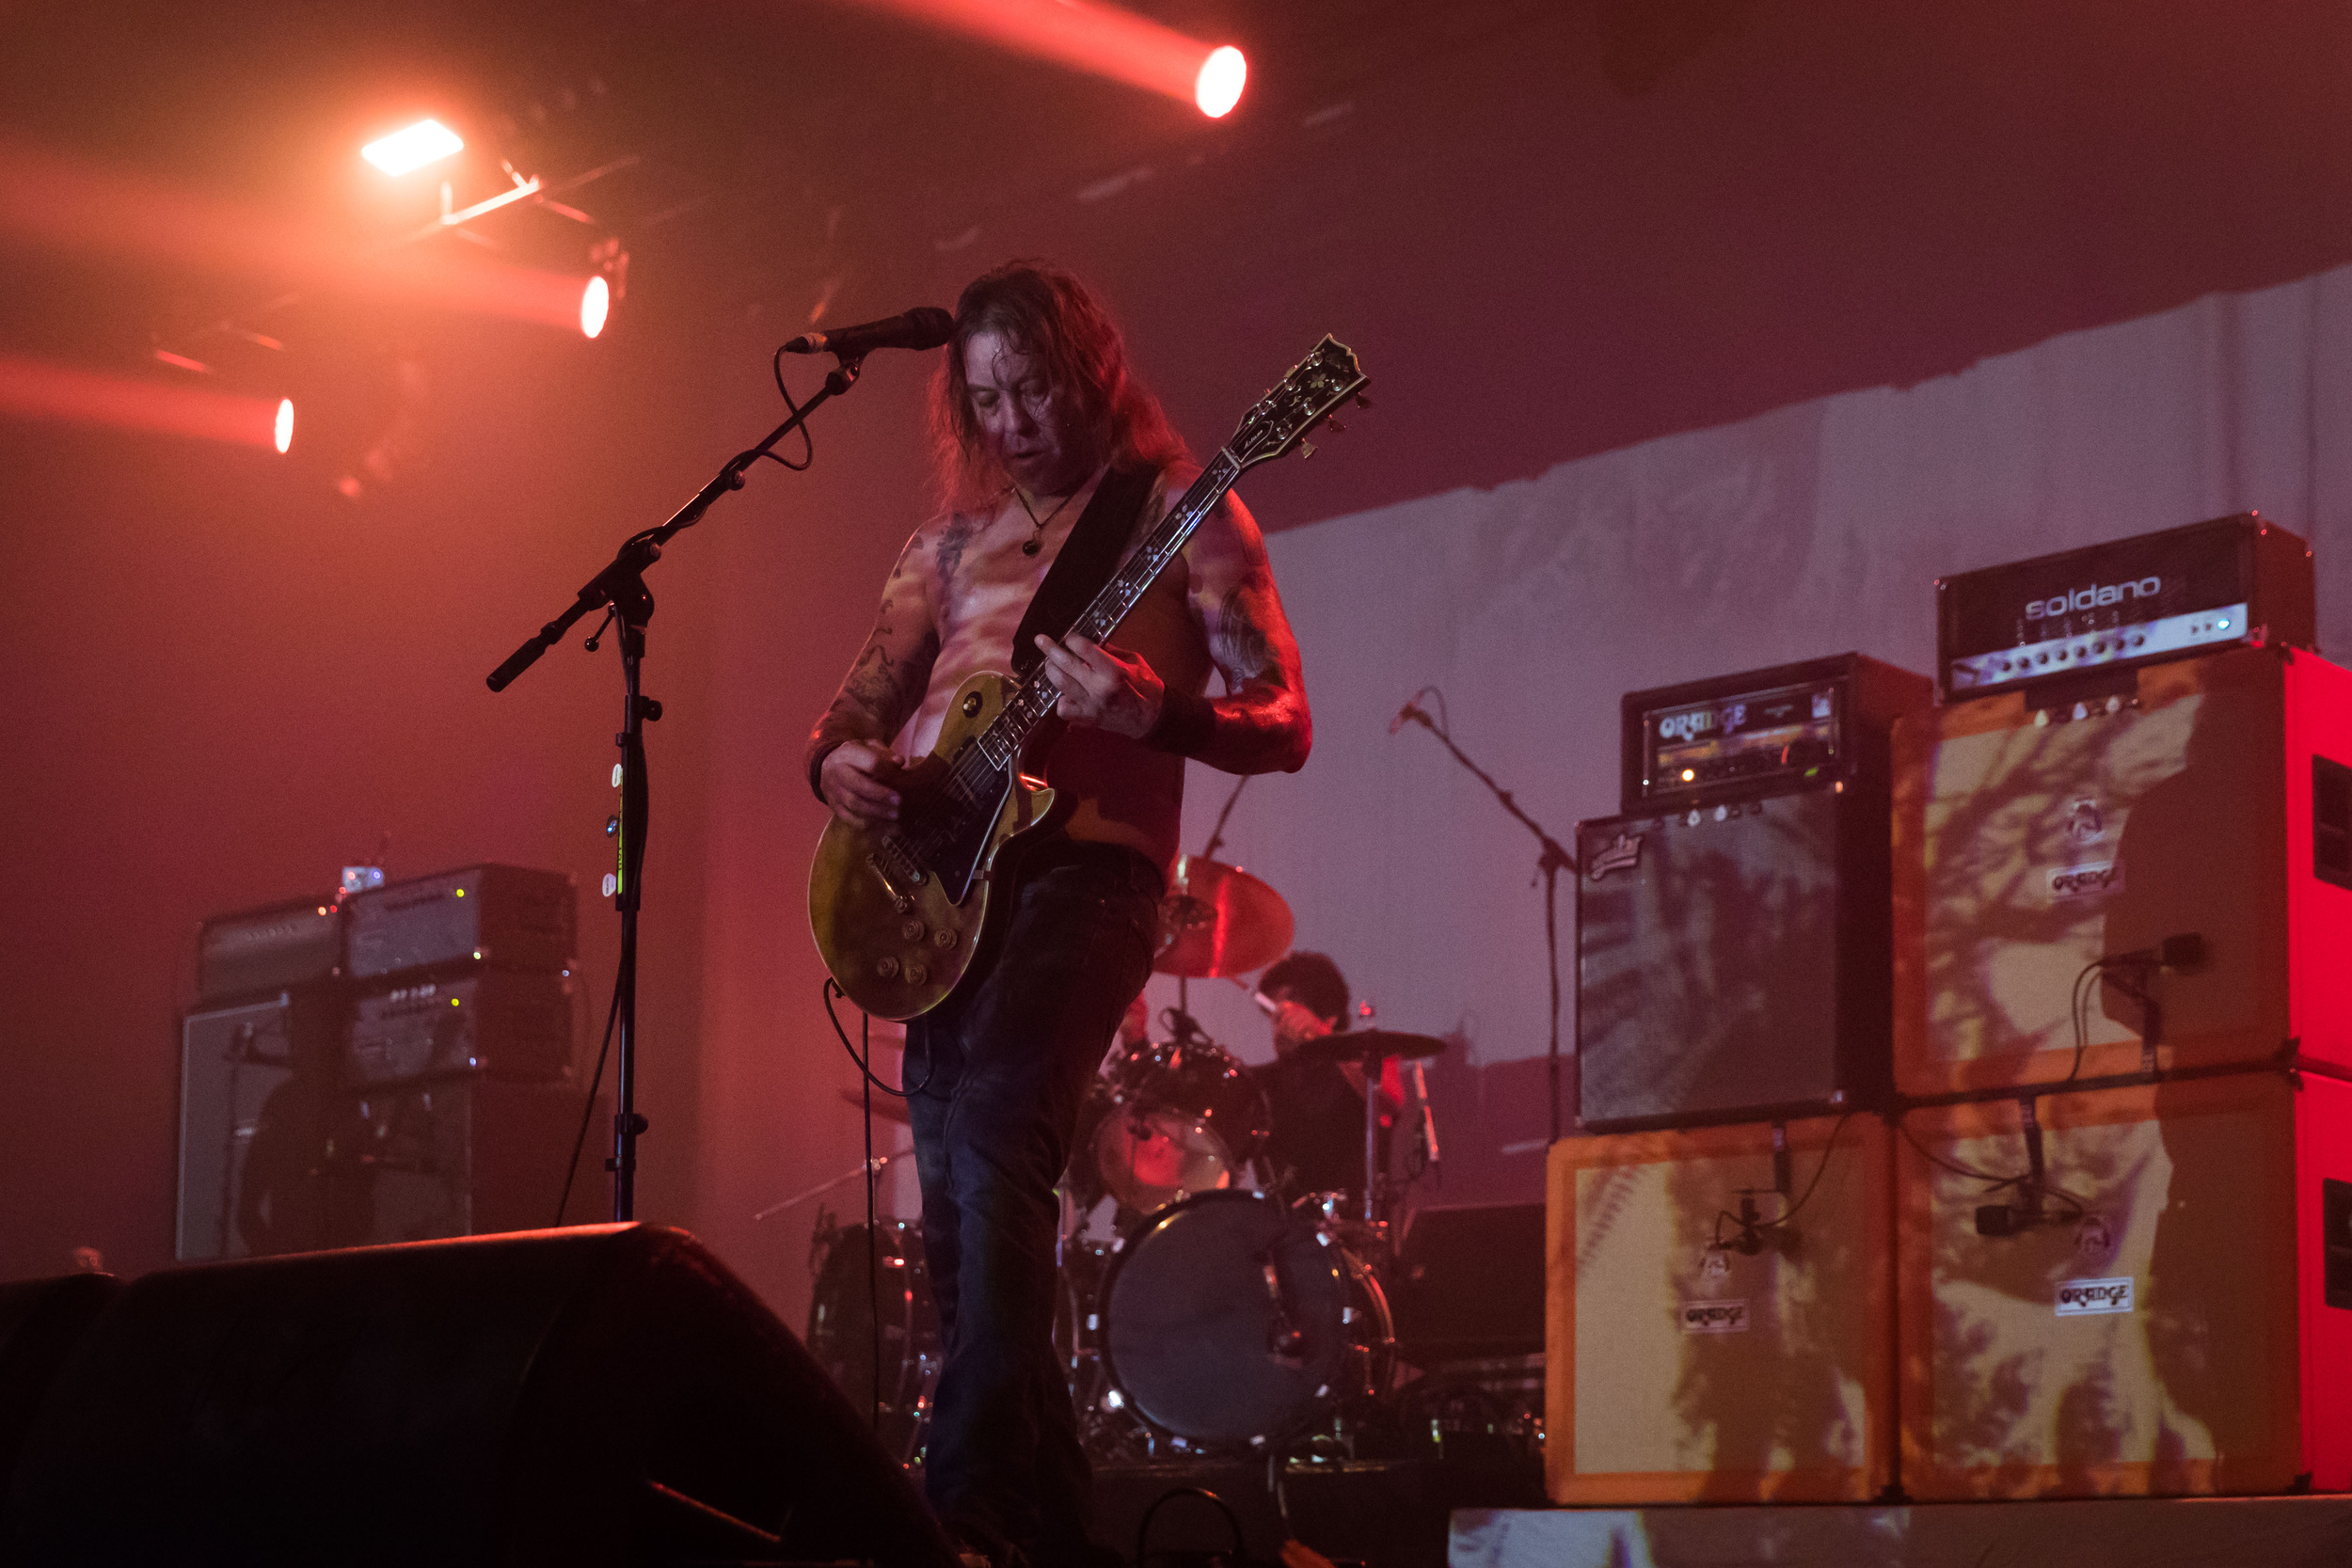 <p>High On Fire returns this year after a six-year gap between albums. Main dude Matt Pike was busy during the pandemic with his solo project Pike vs. the Automaton, which was released in 2022. The lead single, "Burning Down", illustrates how new drummer Coady Willis (Big Business, Melvins) is a perfect fit for the stoner/sludge band. </p><p>You may also like: <a href='https://www.yardbarker.com/entertainment/articles/famous_actors_who_had_early_roles_in_horror_movies/s1__33155618'>Famous actors who had early roles in horror movies</a></p>